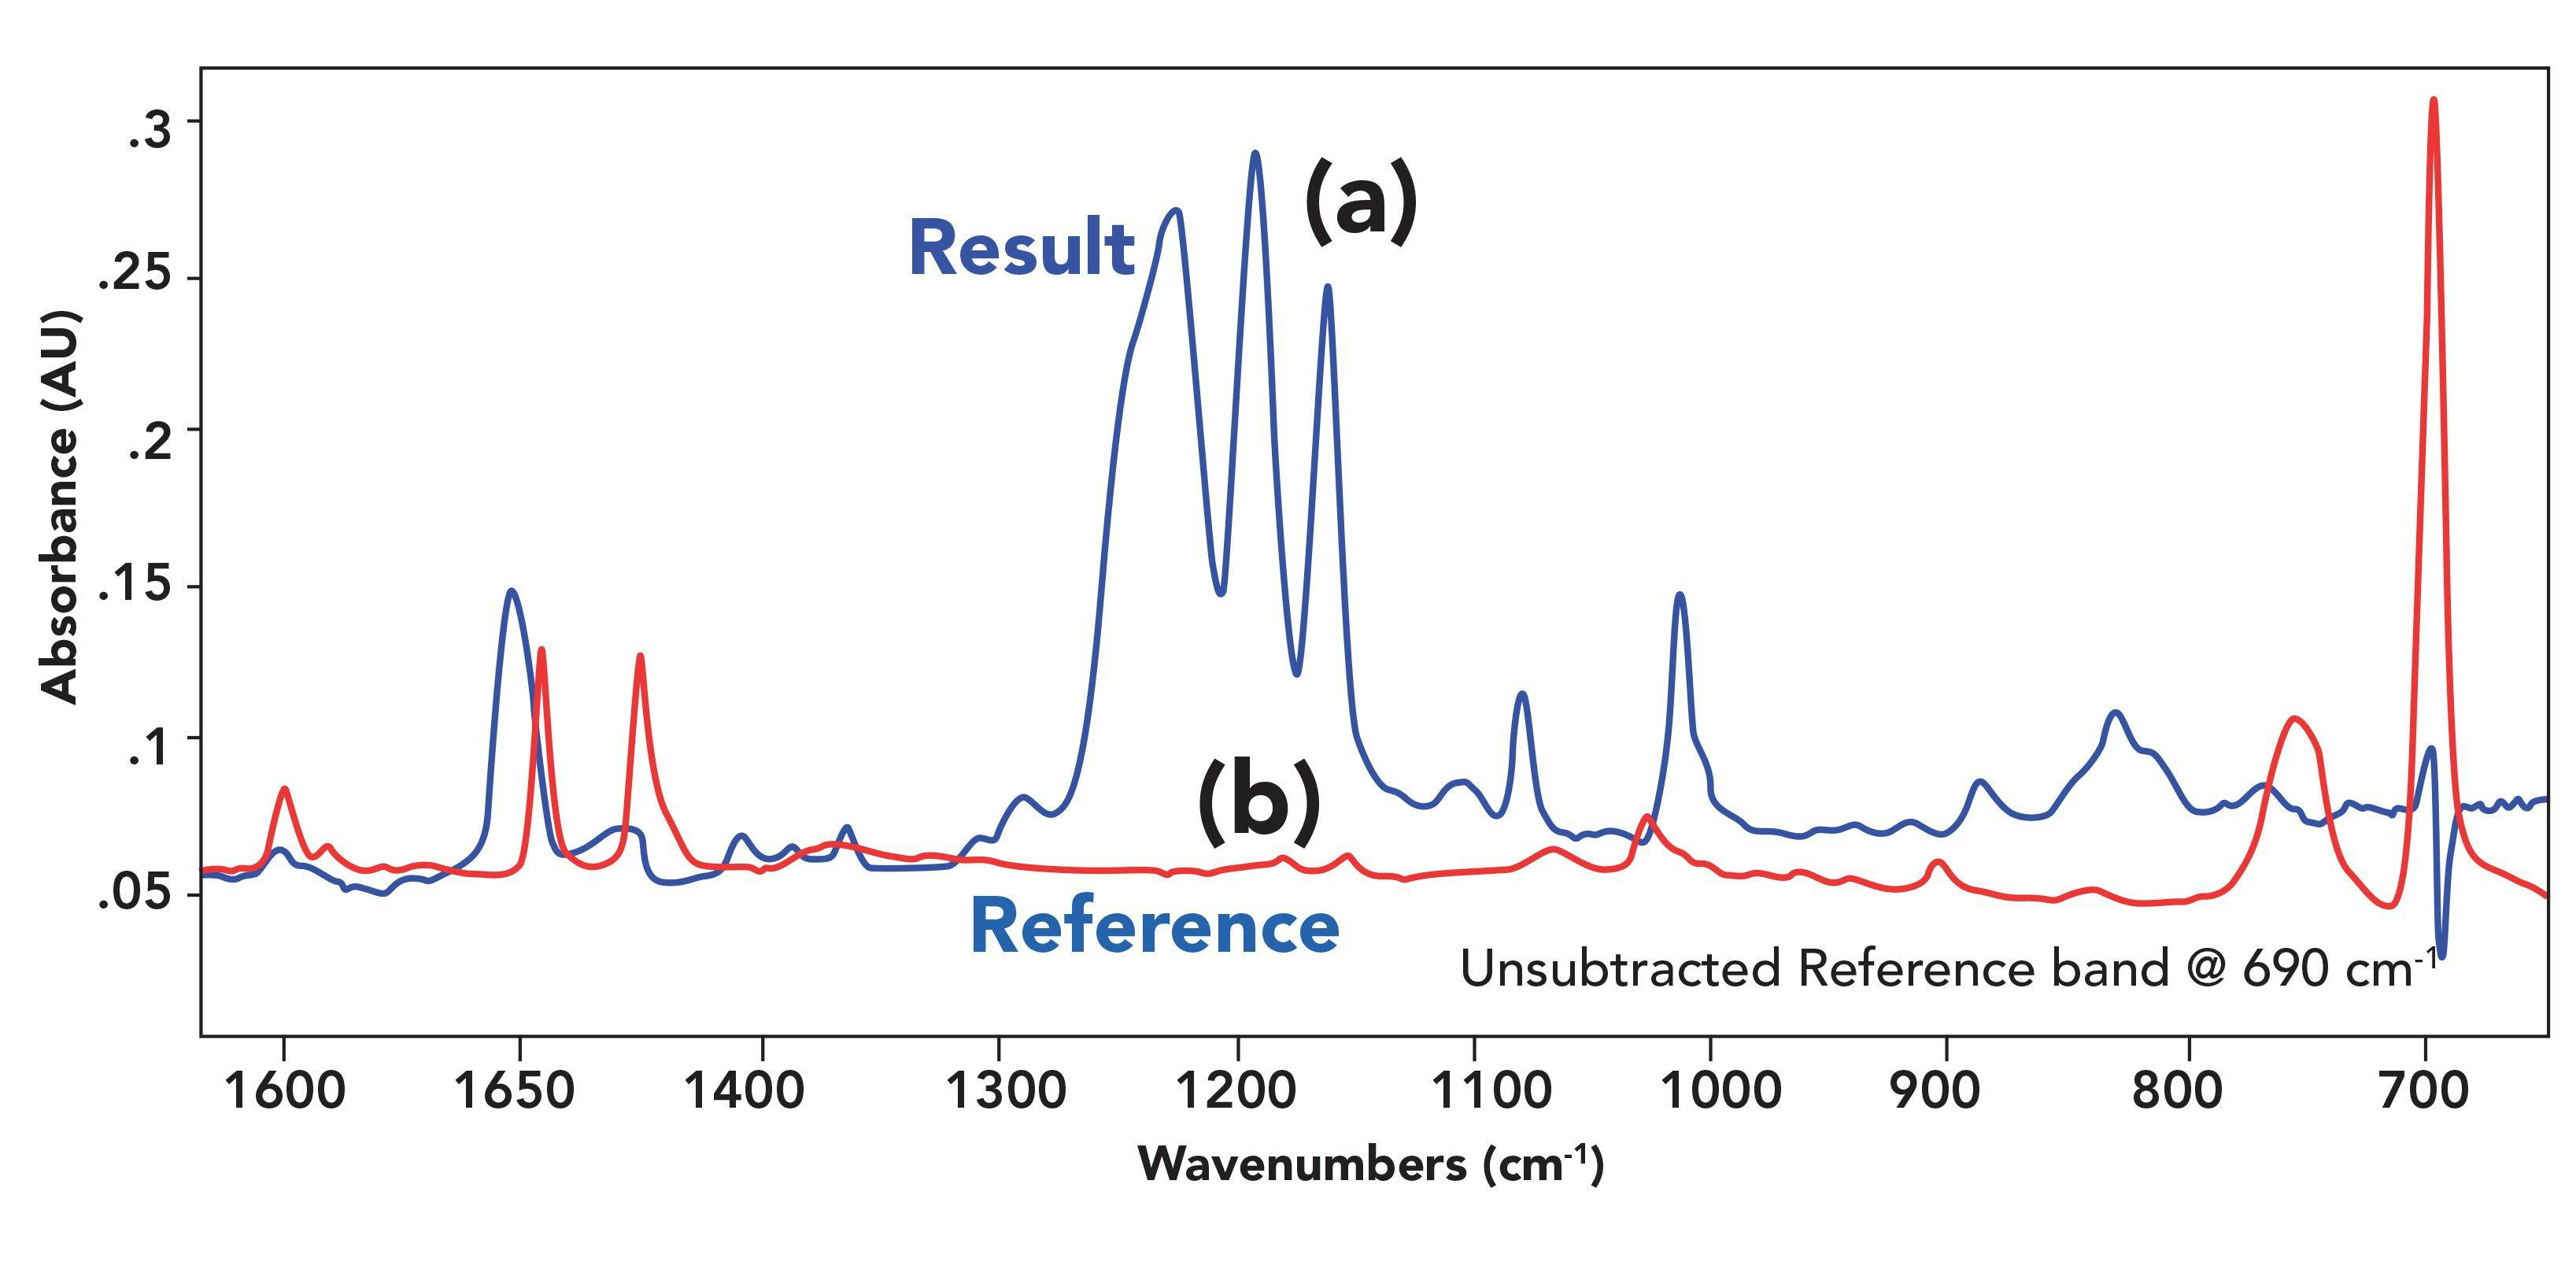 FIGURE 6: (a) A subtraction result with an unsubtracted reference band at 690 cm-1, and (b) A portion of a reference spectrum of polystyrene.